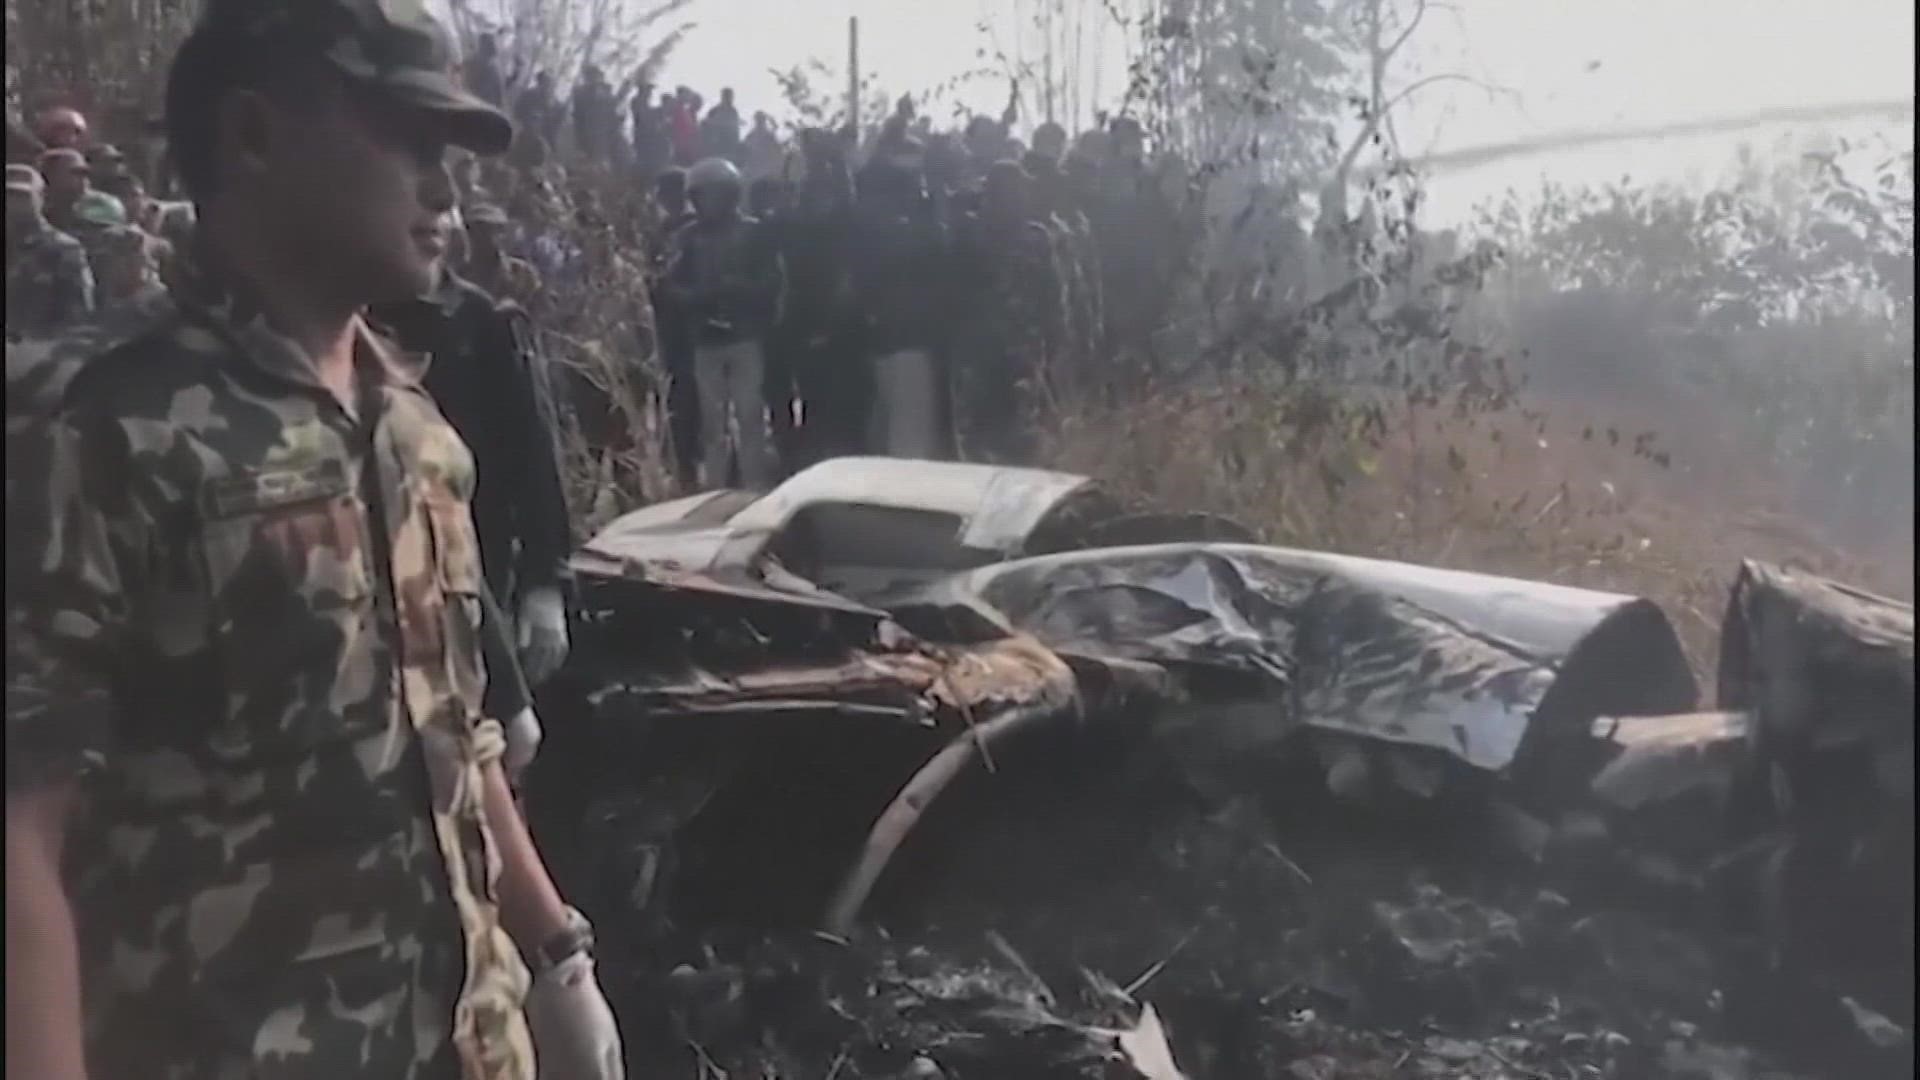 The aircraft's fuselage was split into multiple parts, and videos showed billowing smoke as rescuers searched for survivors.